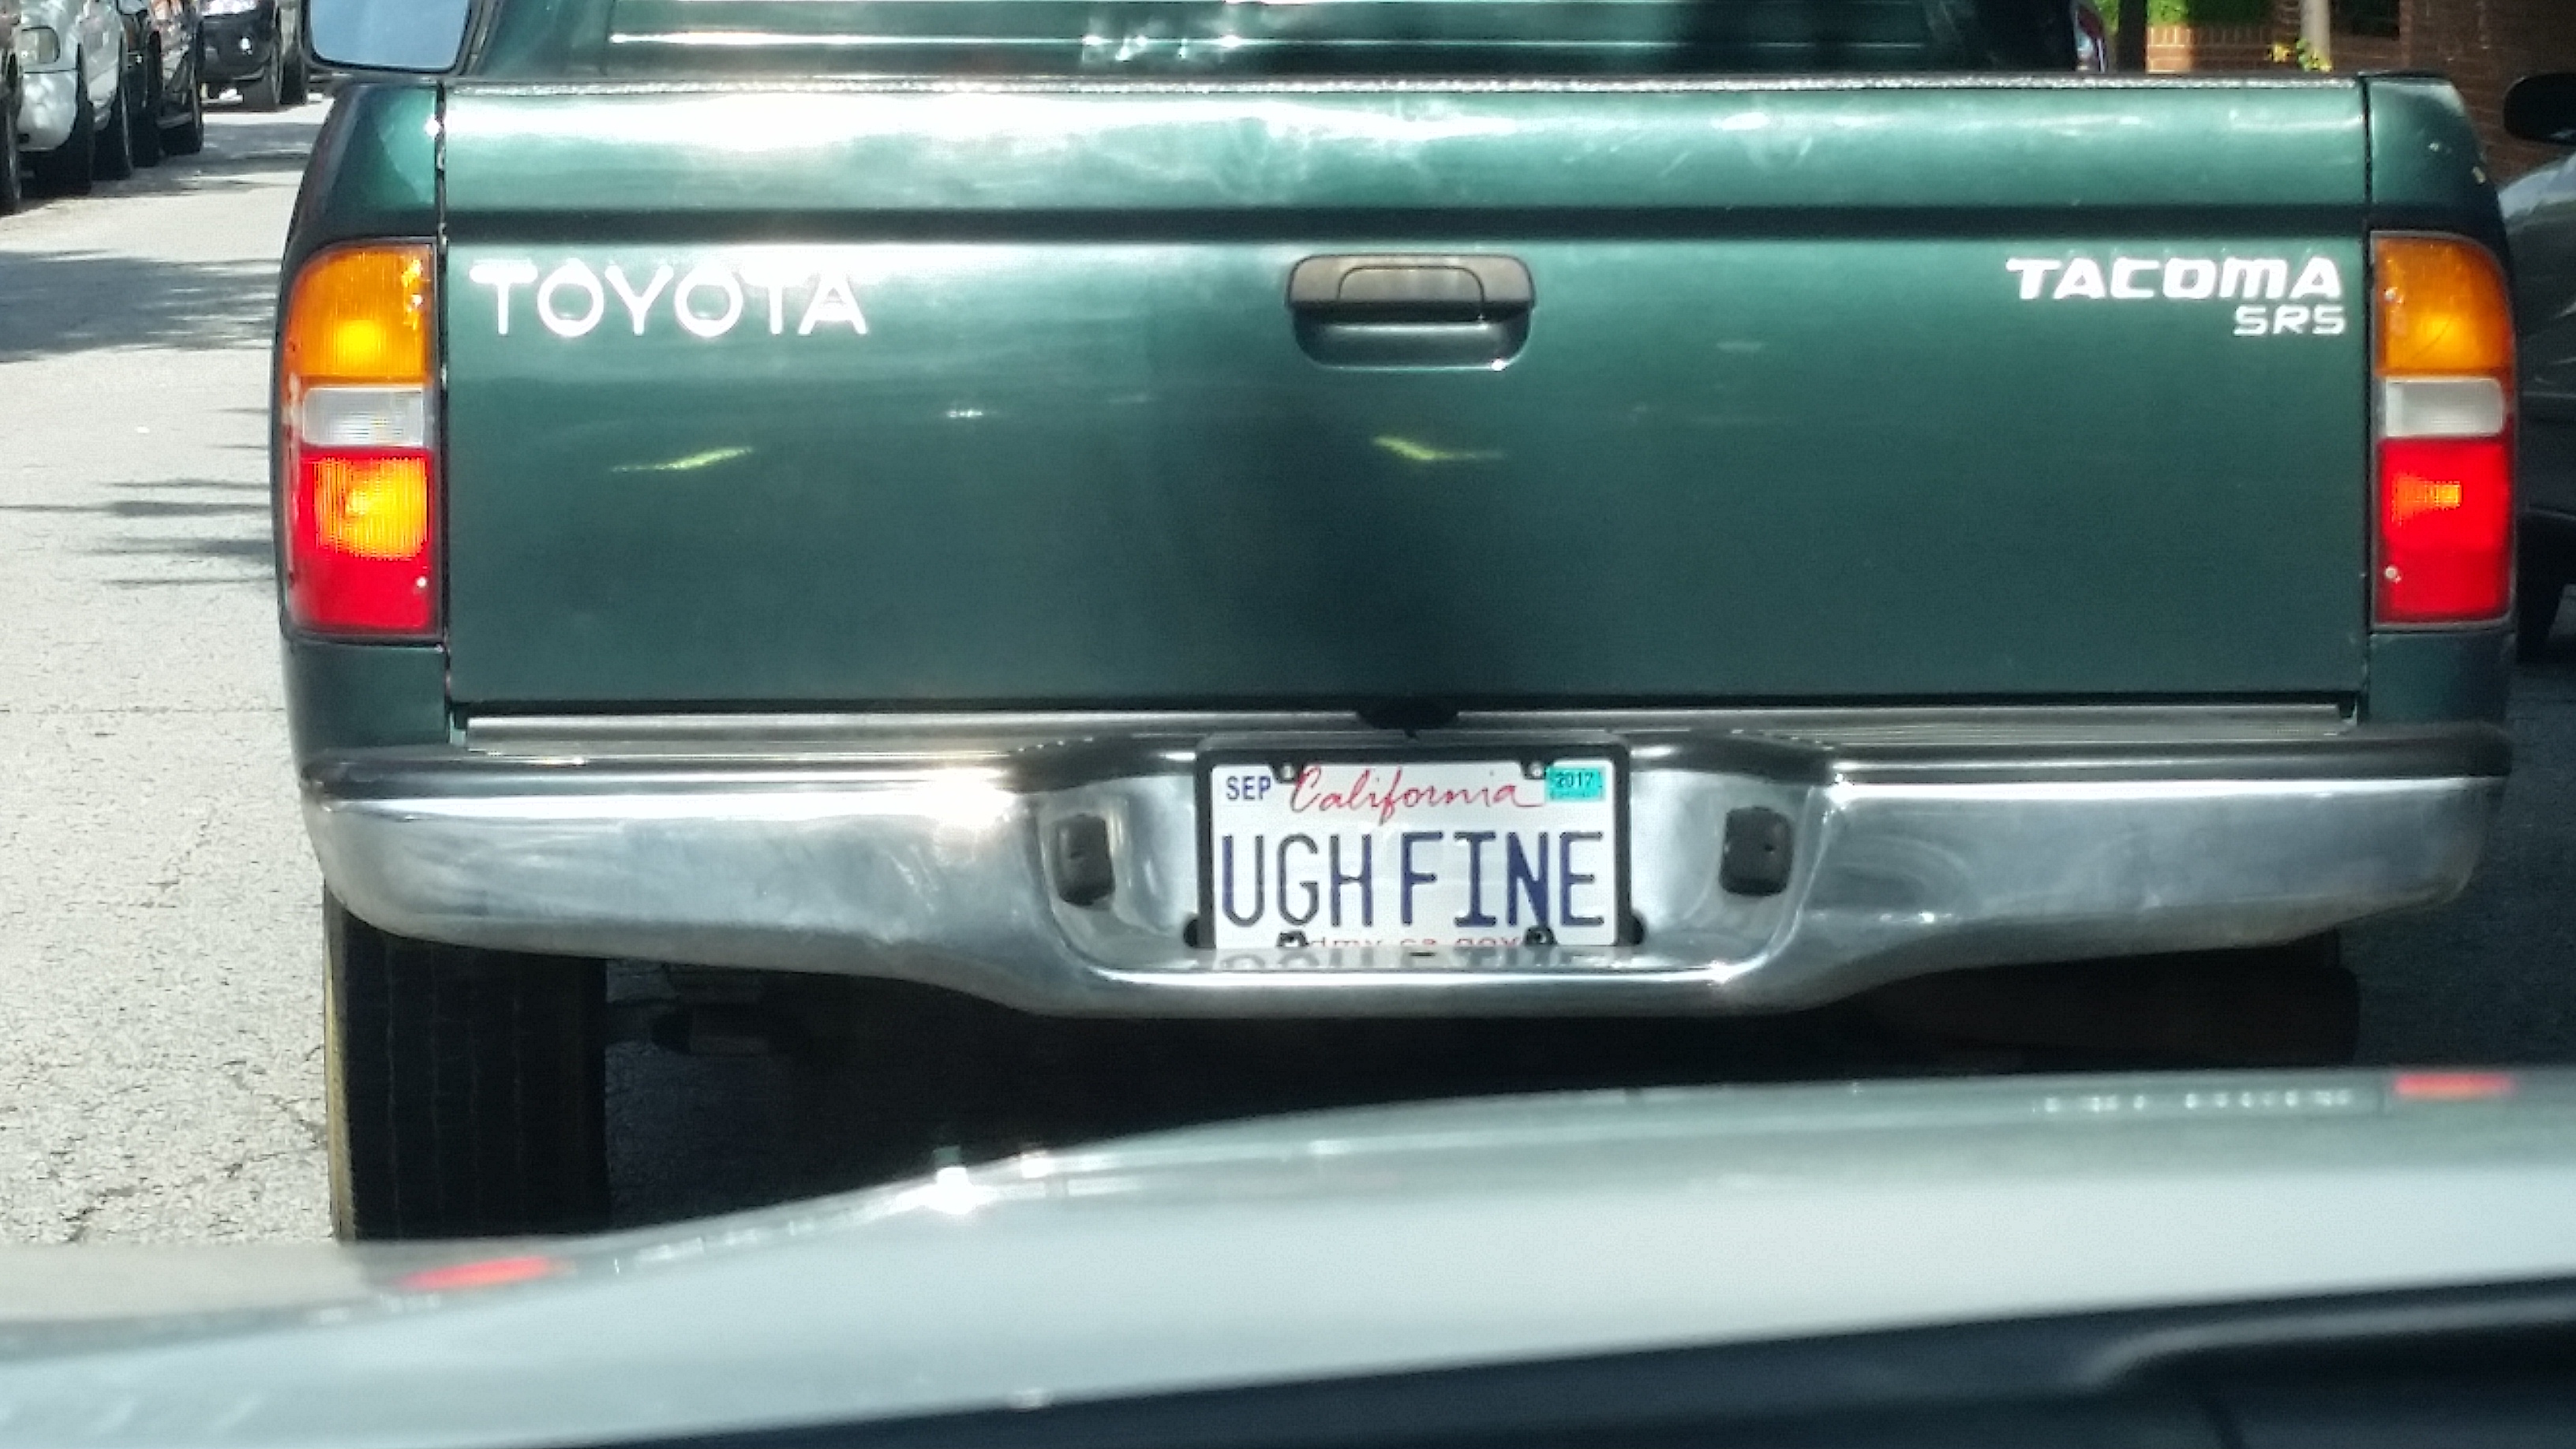 License plate of California that says Ugh fine